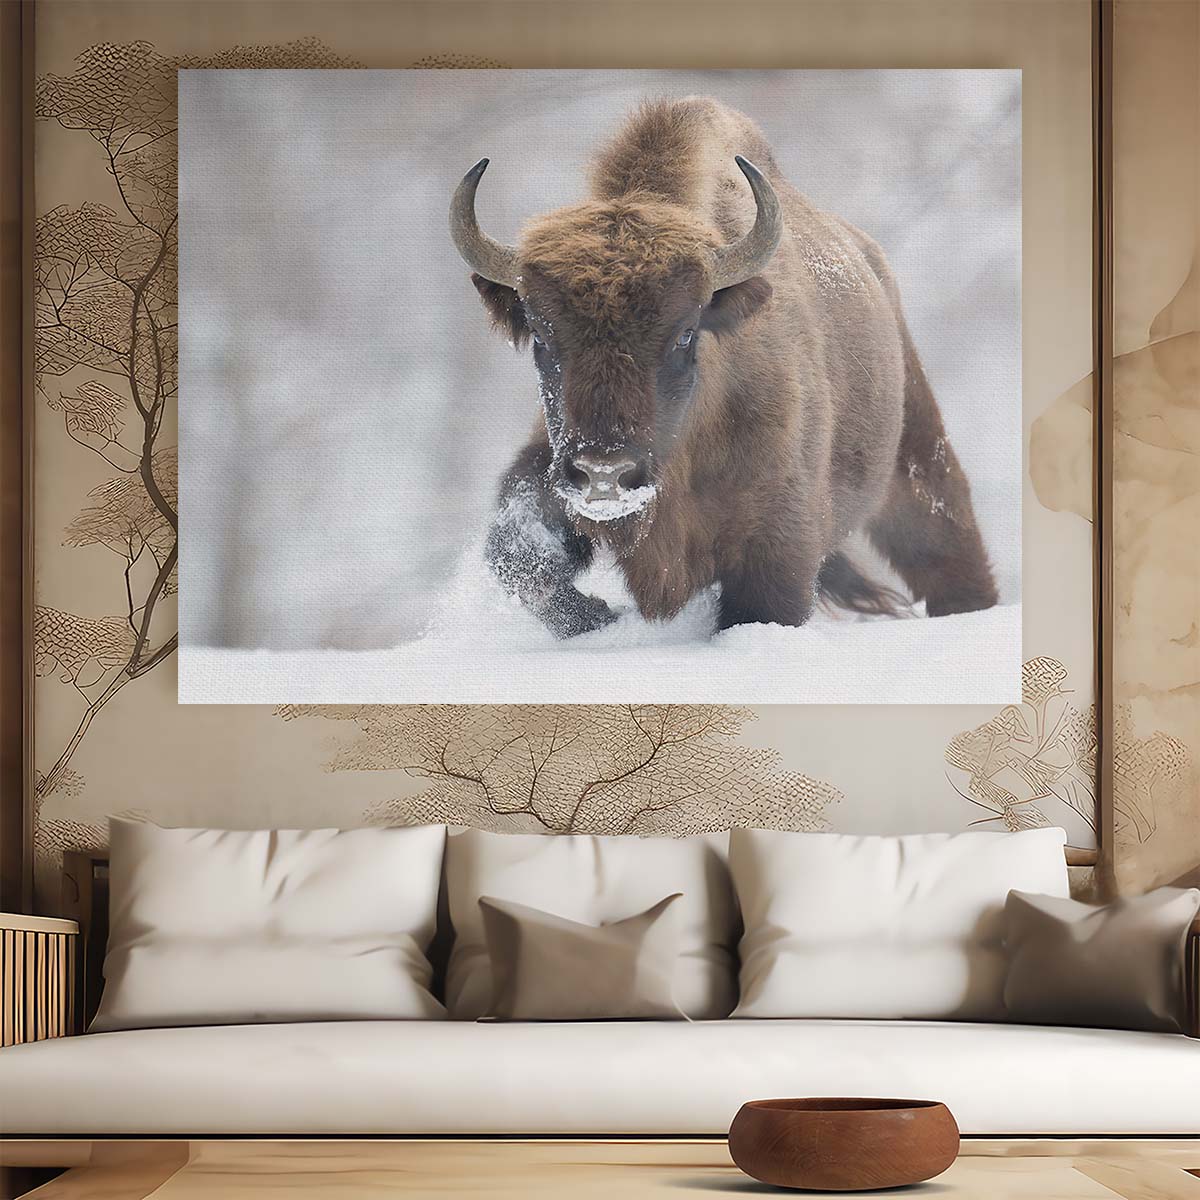 Majestic Snowy Bison in Winter Wilderness Wall Art by Luxuriance Designs. Made in USA.